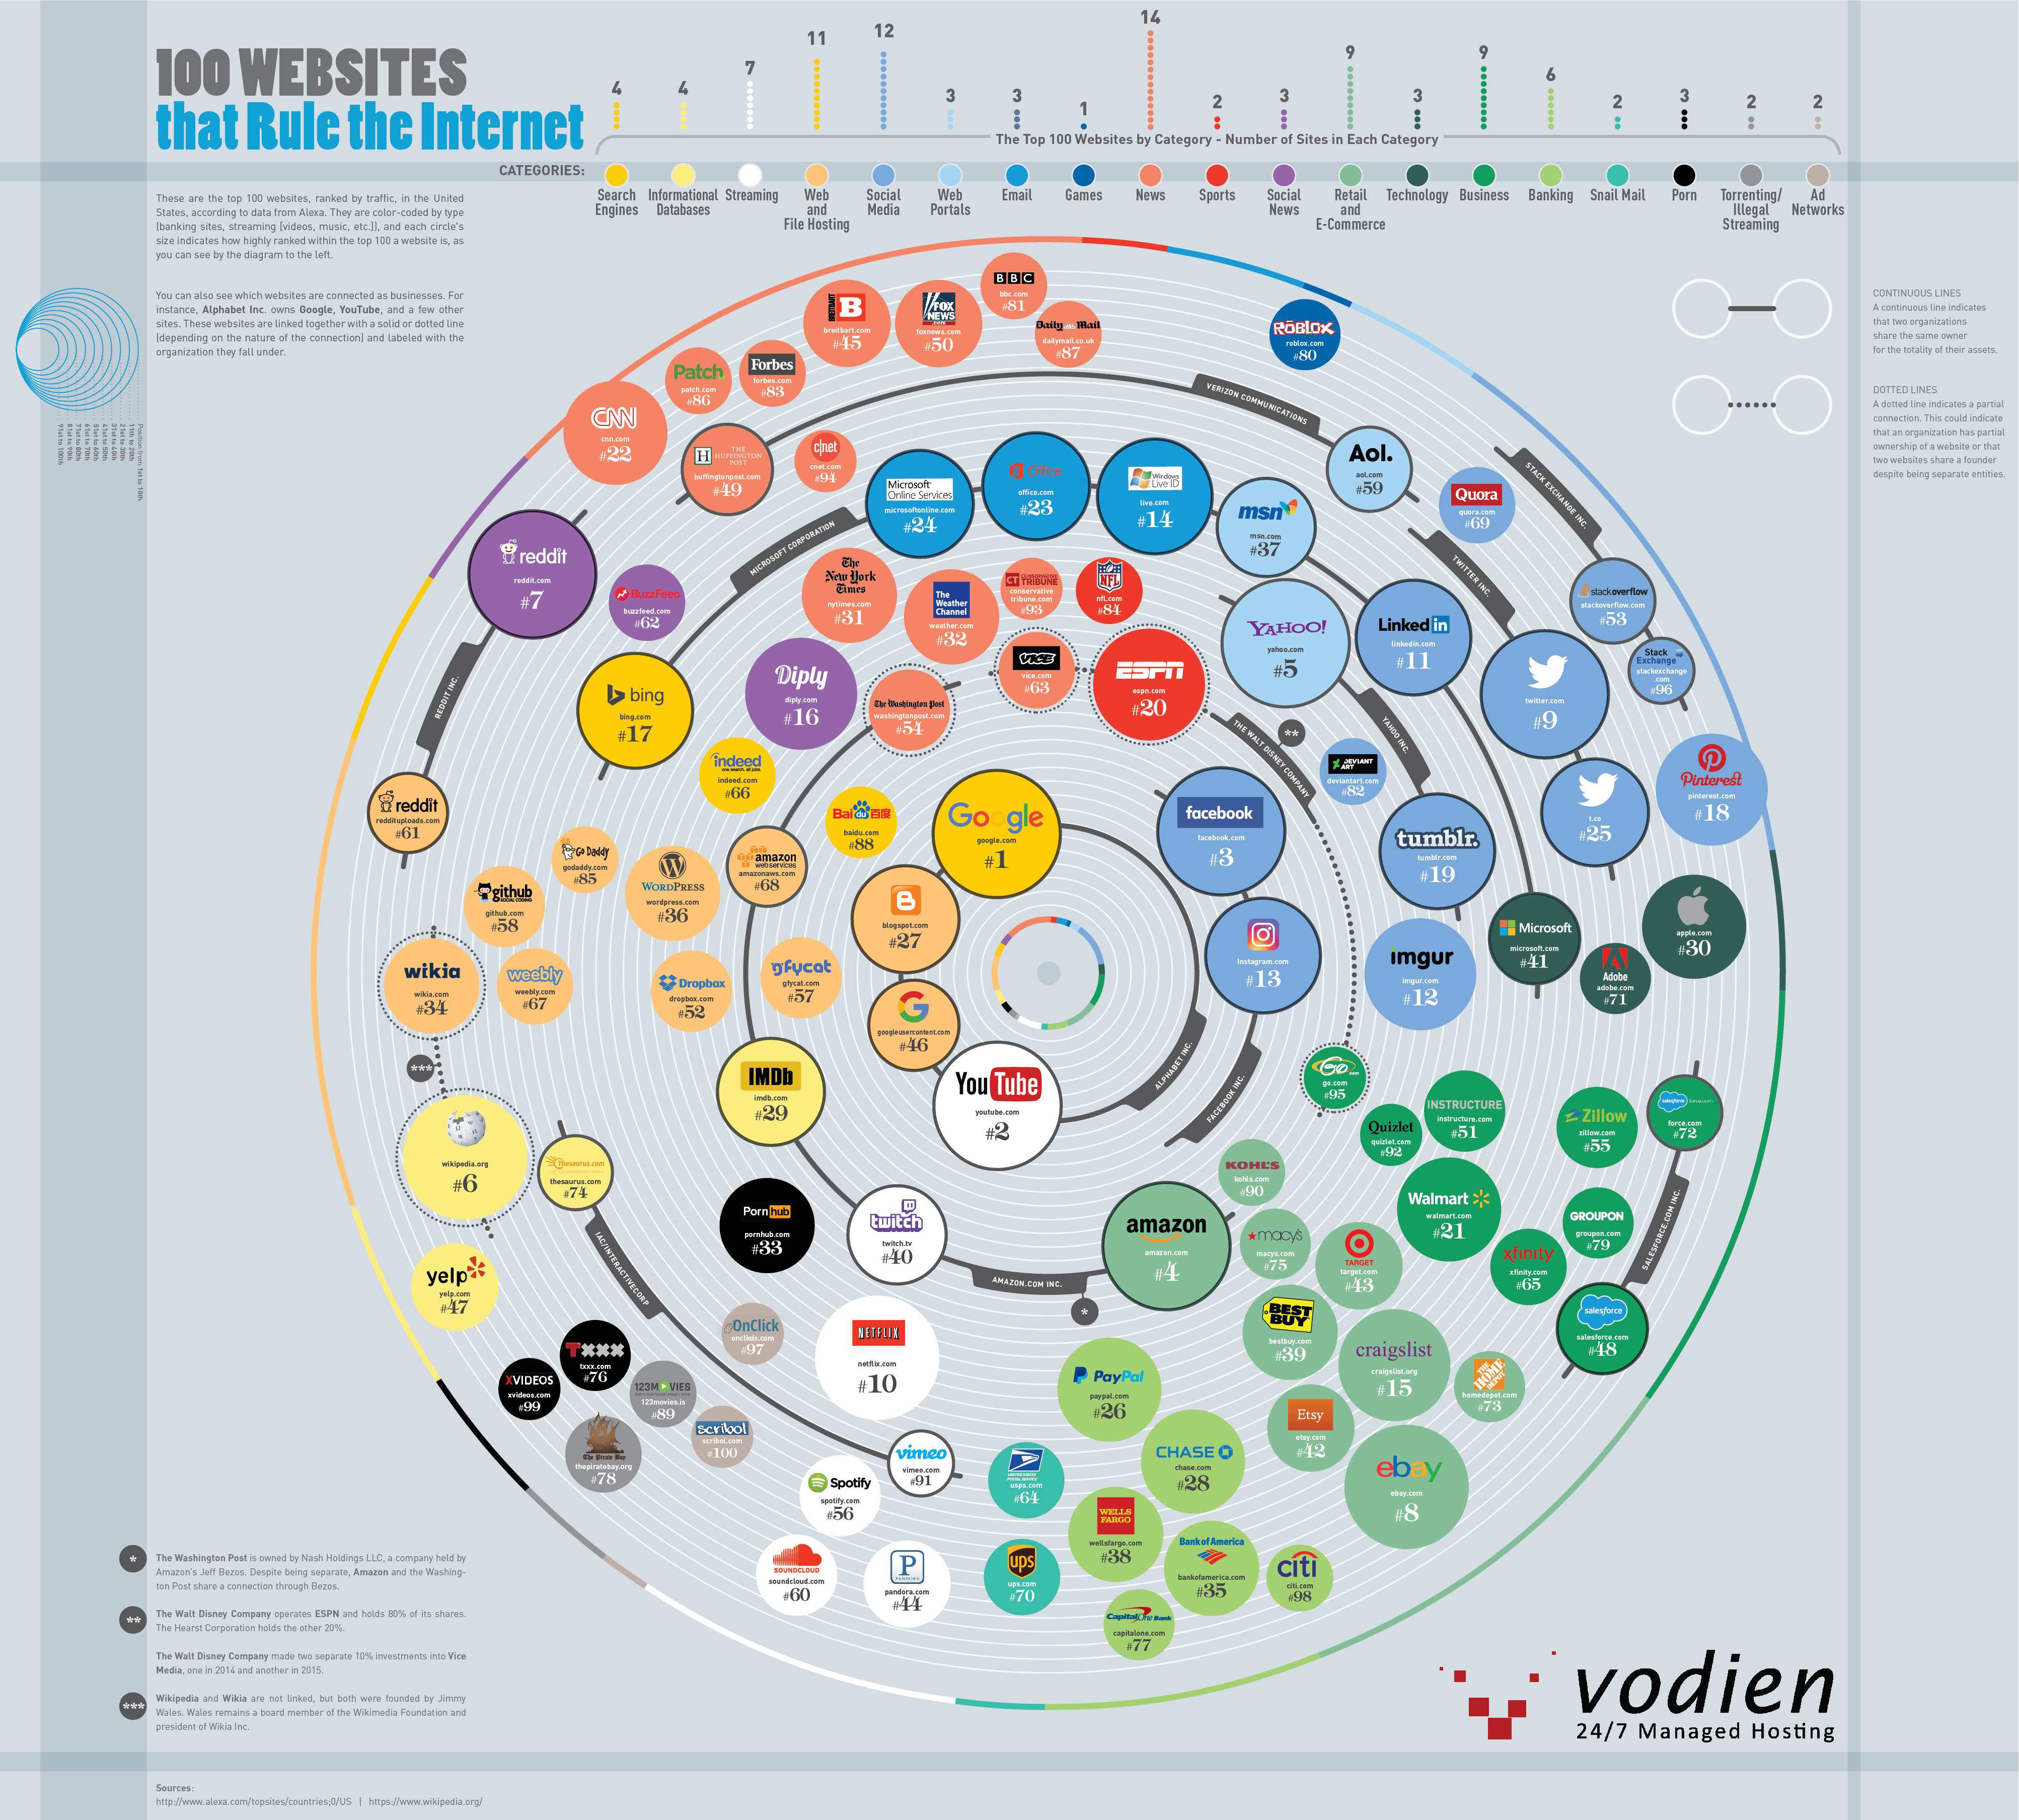 The 100 Websites That Rule the Internet